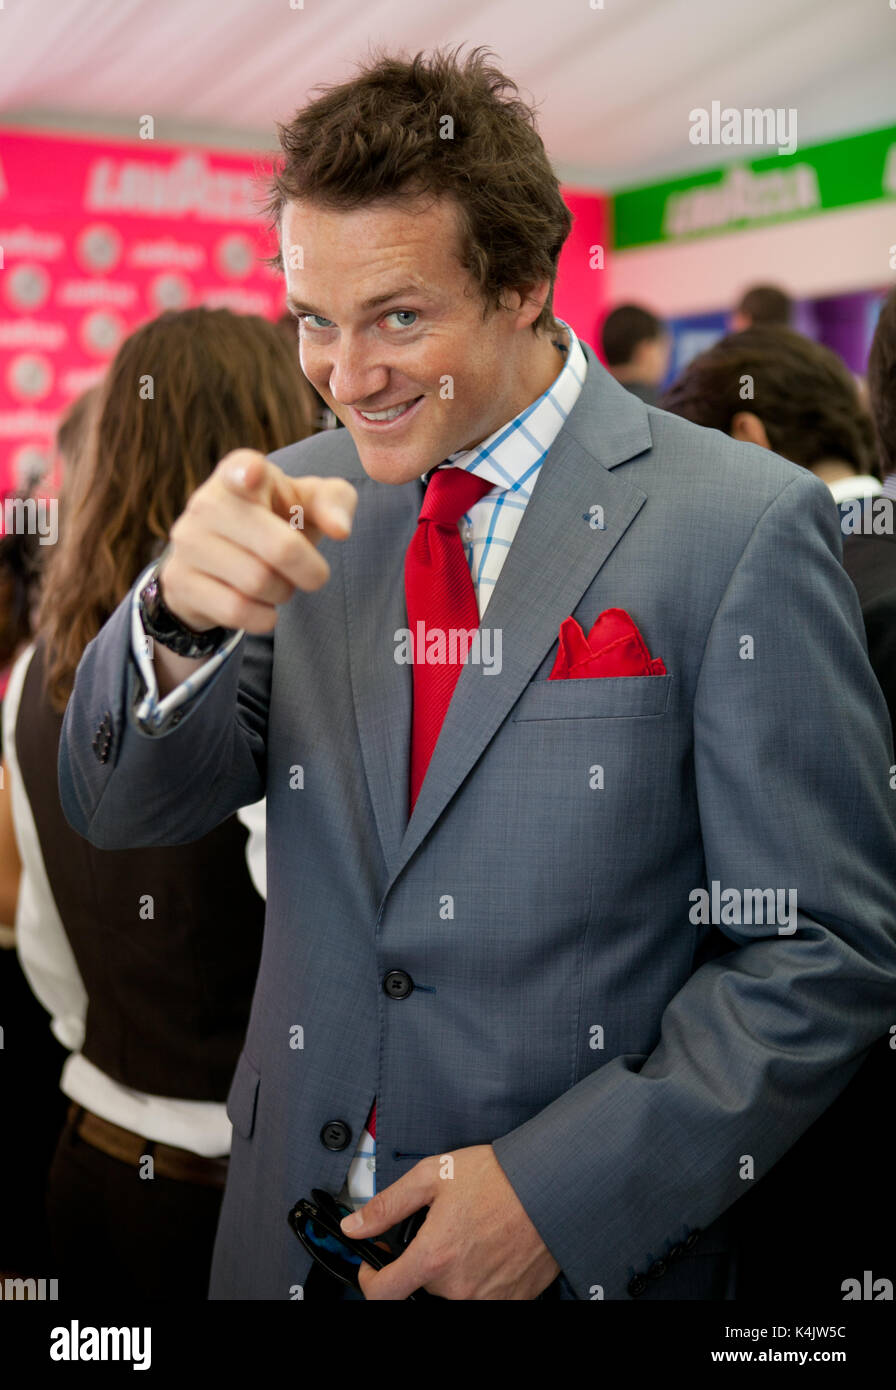 Jules Lund at the Melbourne Cup, Tuesday, November 6, 2012. Stock Photo